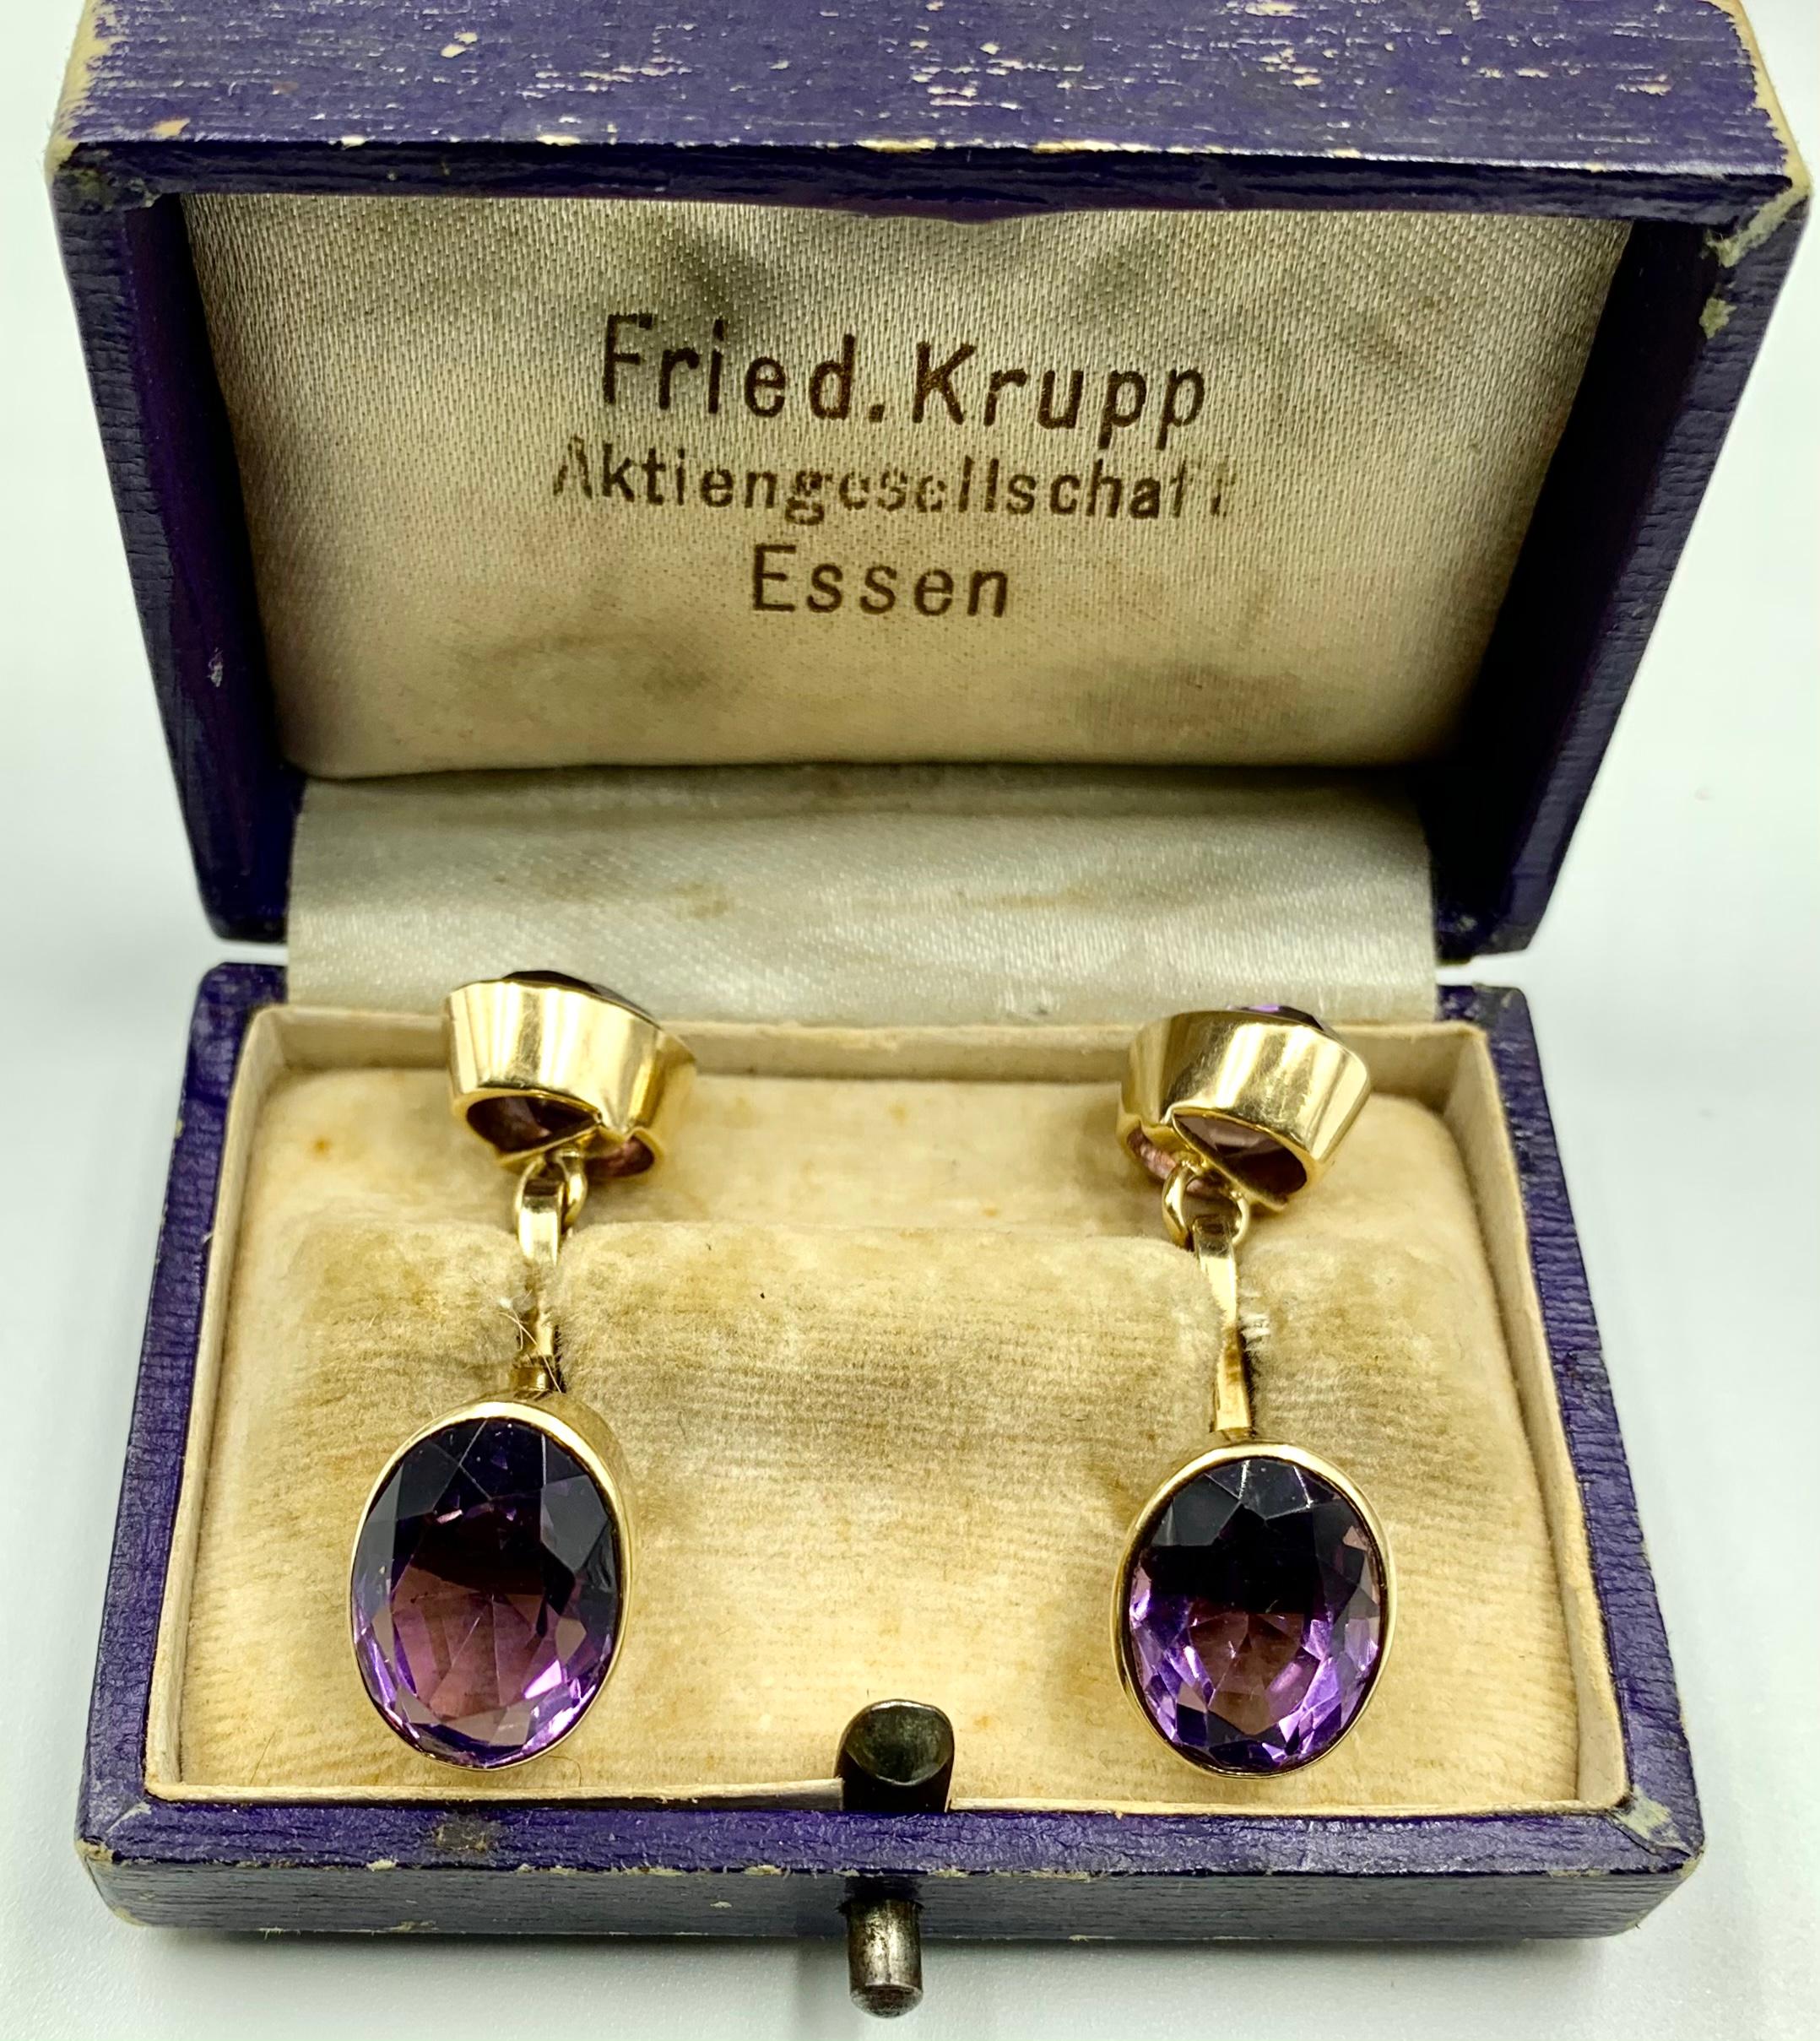 Large faceted octagonal cut oval amethyst 14 karat yellow gold cufflinks with original case marked Fried Krupp Aktiengesellschaf Essen. Substantial gold setting, the four stones measuring 13mm by 9mm, the largest to 11mm by 8mm, the